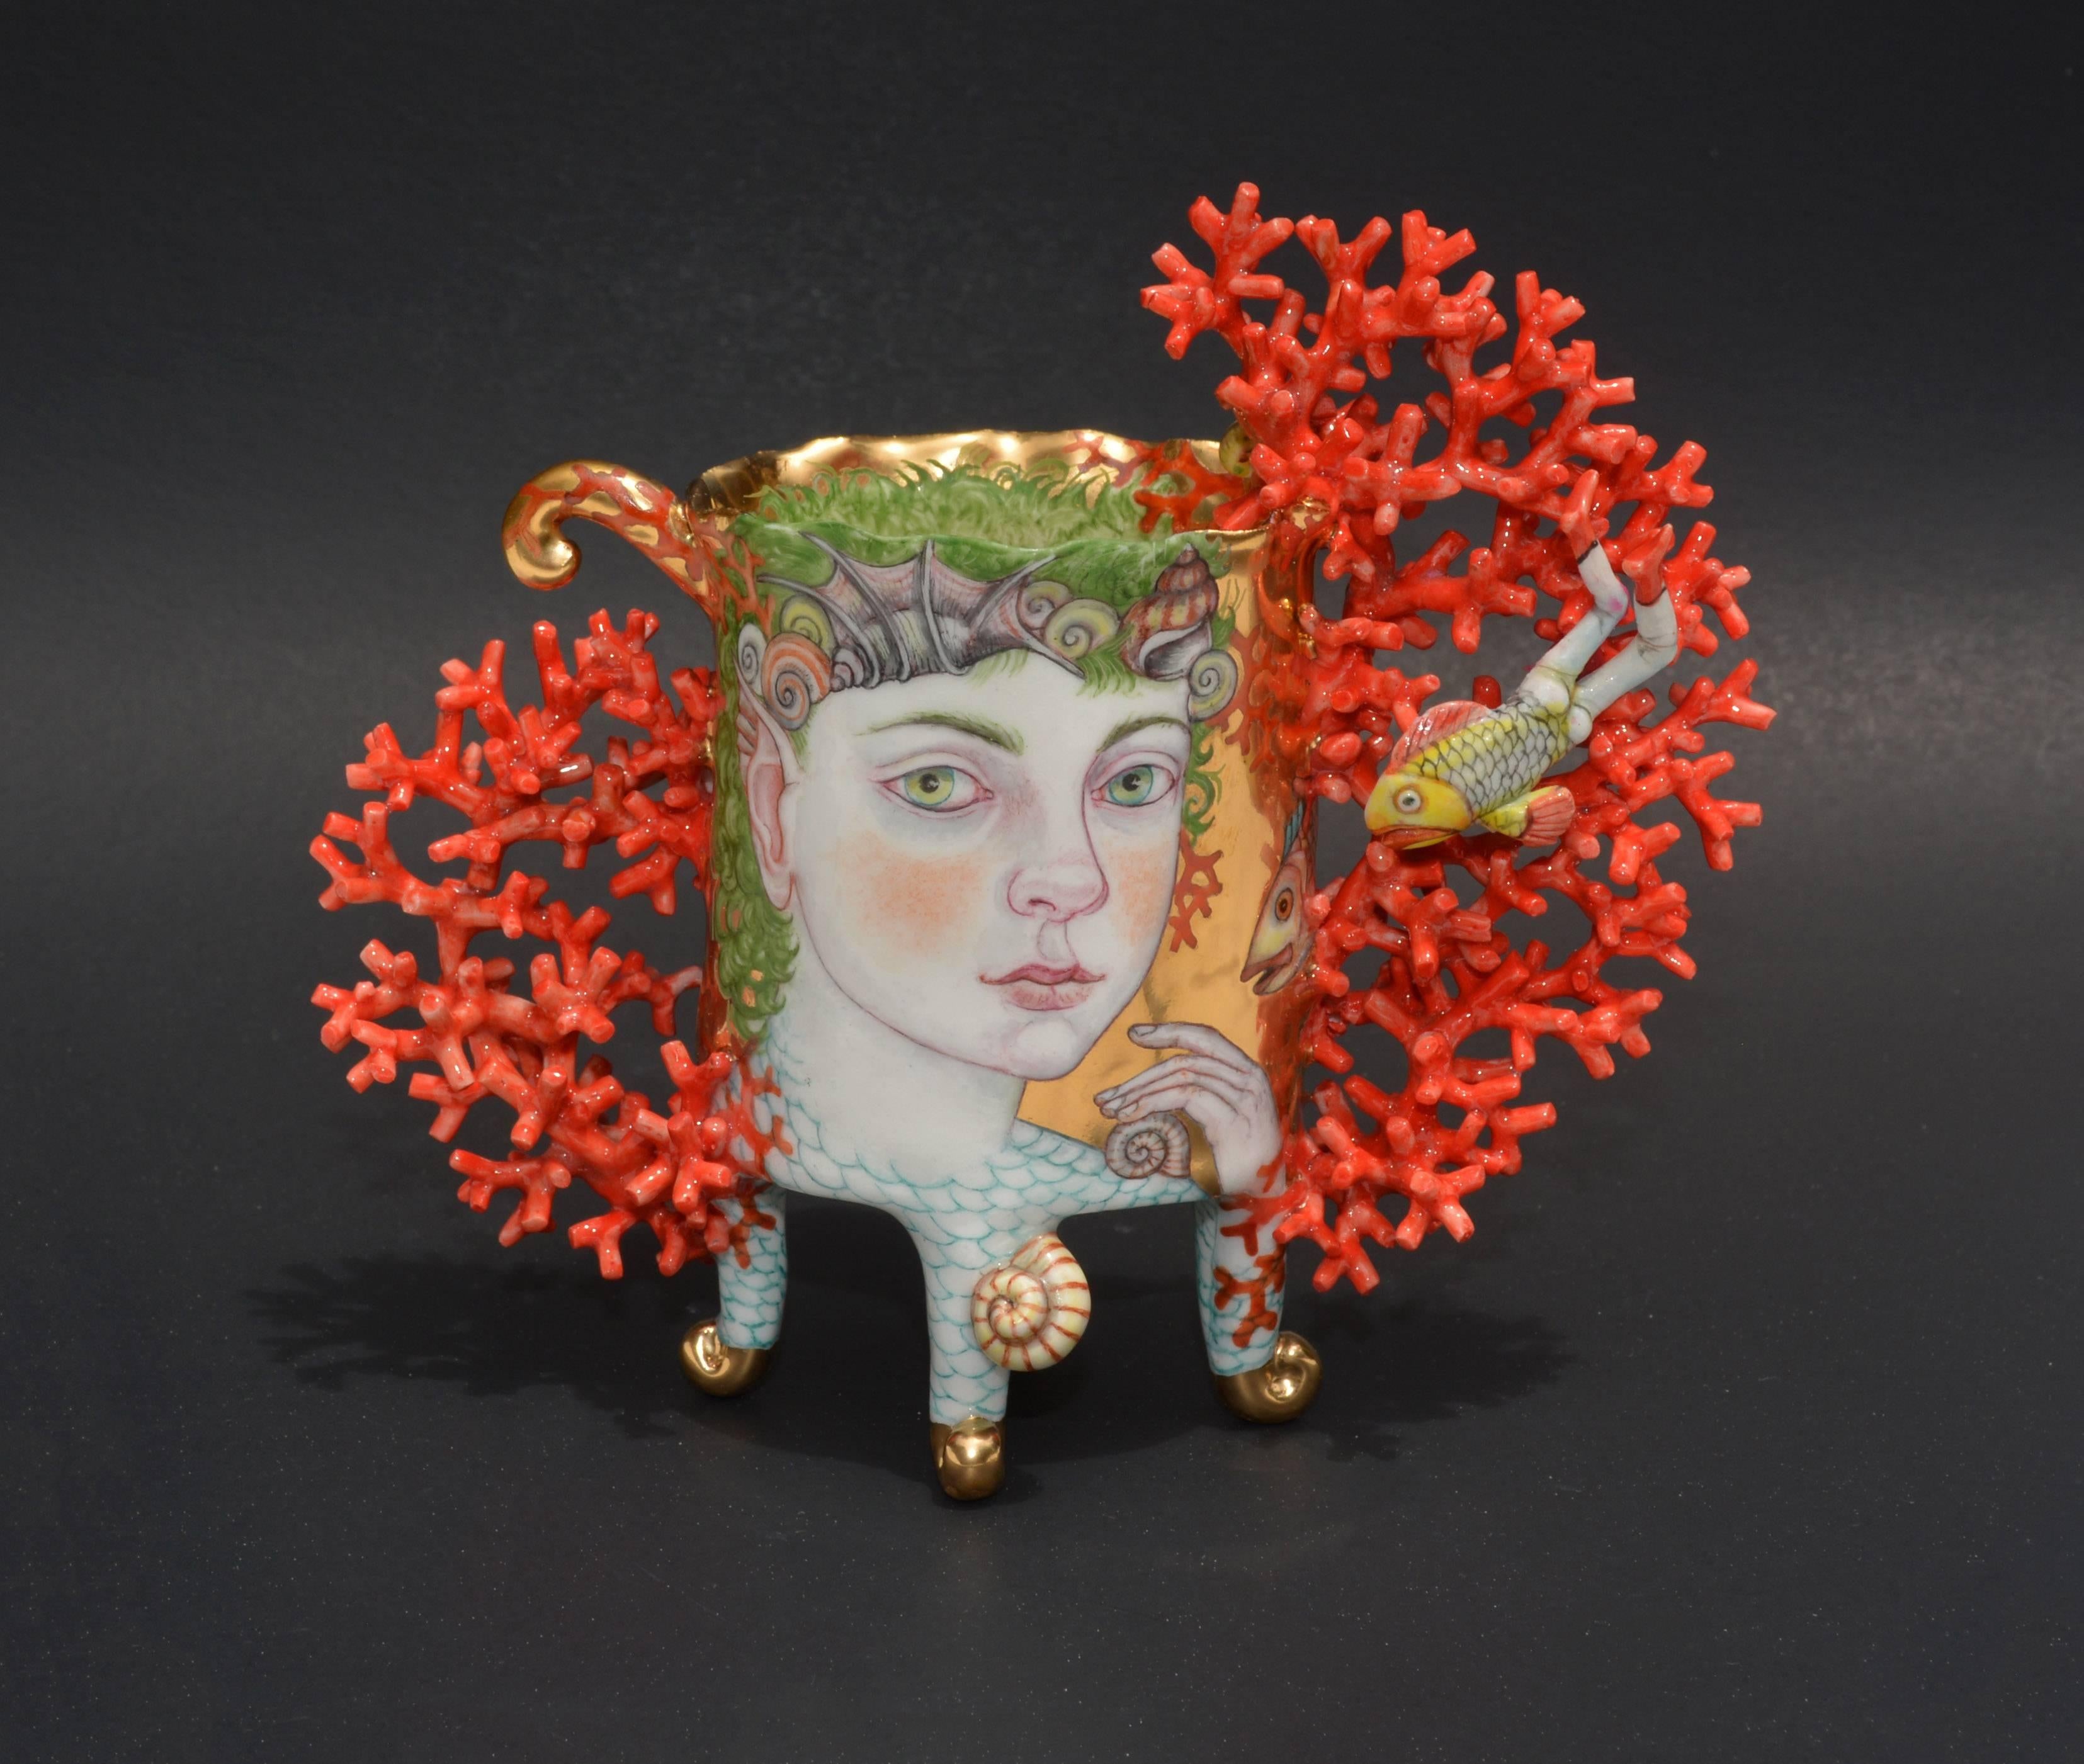 Delicately hand sculpted porcelain body with lovingly applied painted illustration over gold luster glaze. 

Irina Zaytceva was born in Moscow, Russia in 1957. As a child, she loved to draw and sculpt and eventually decided to make it her vocation.